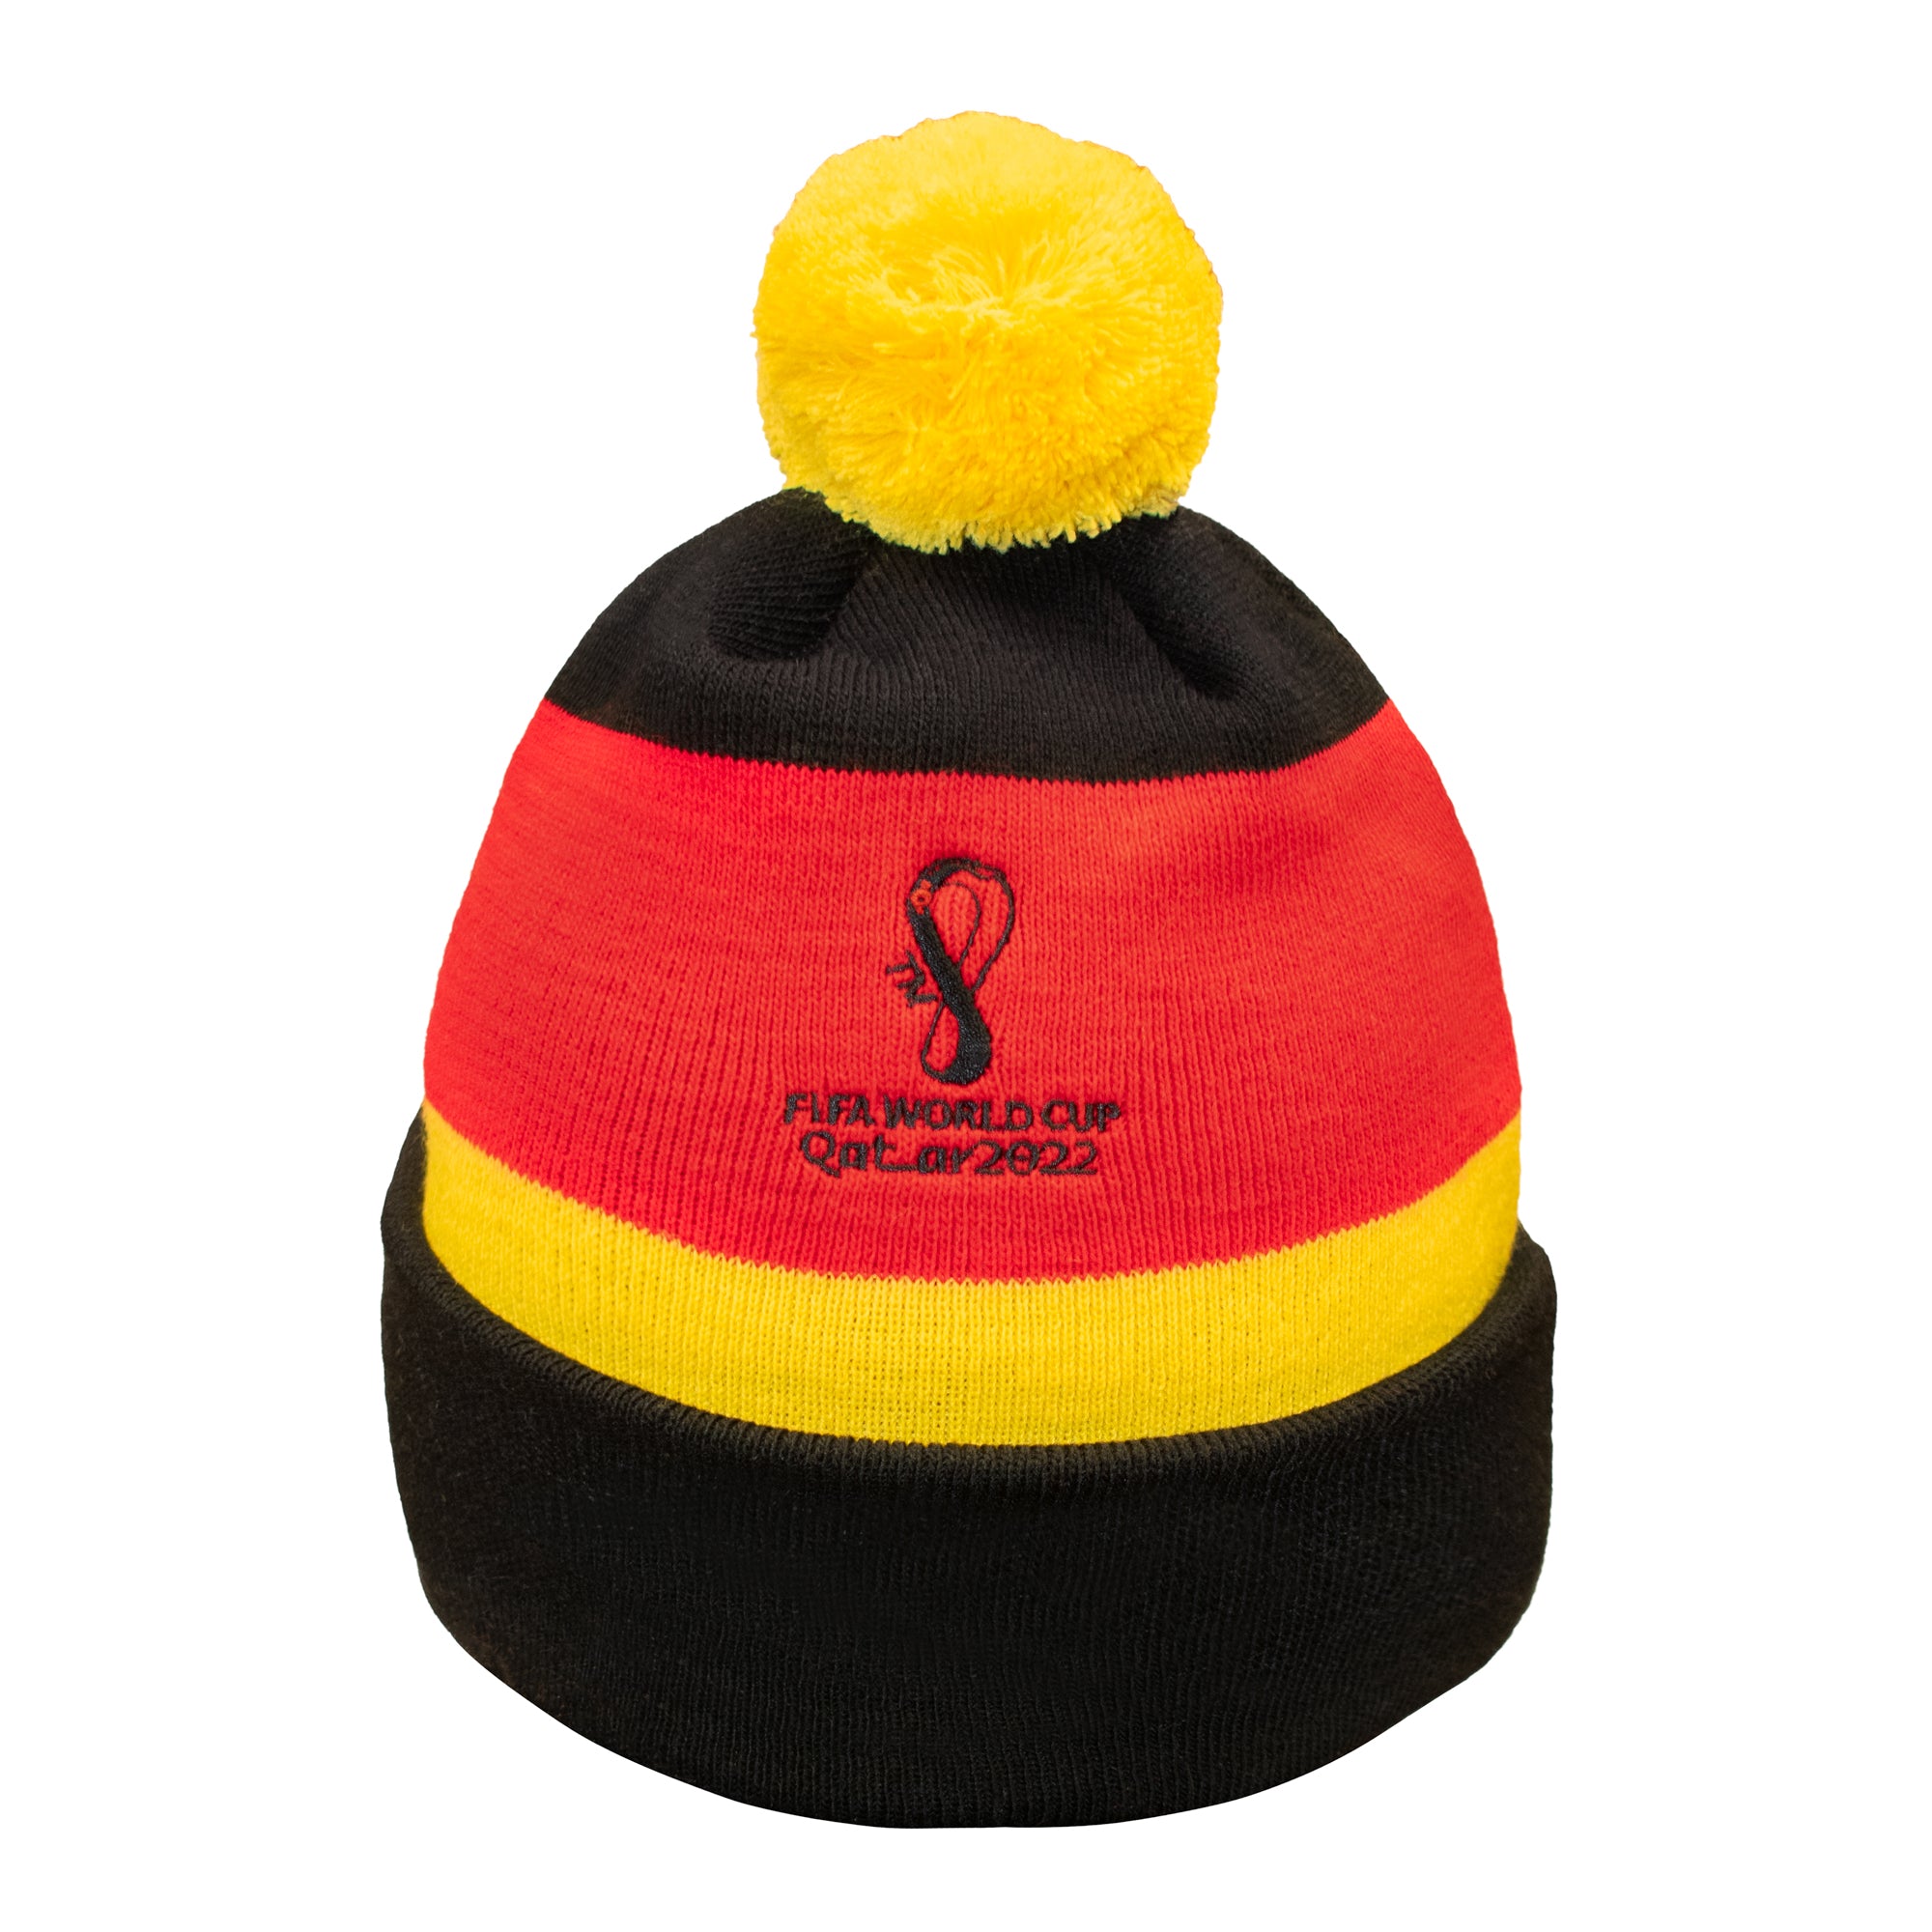 beanie-germany-worldcup-productimage-back_29c1dc57-cd73-4a11-854e-f84d125835c4.jpg